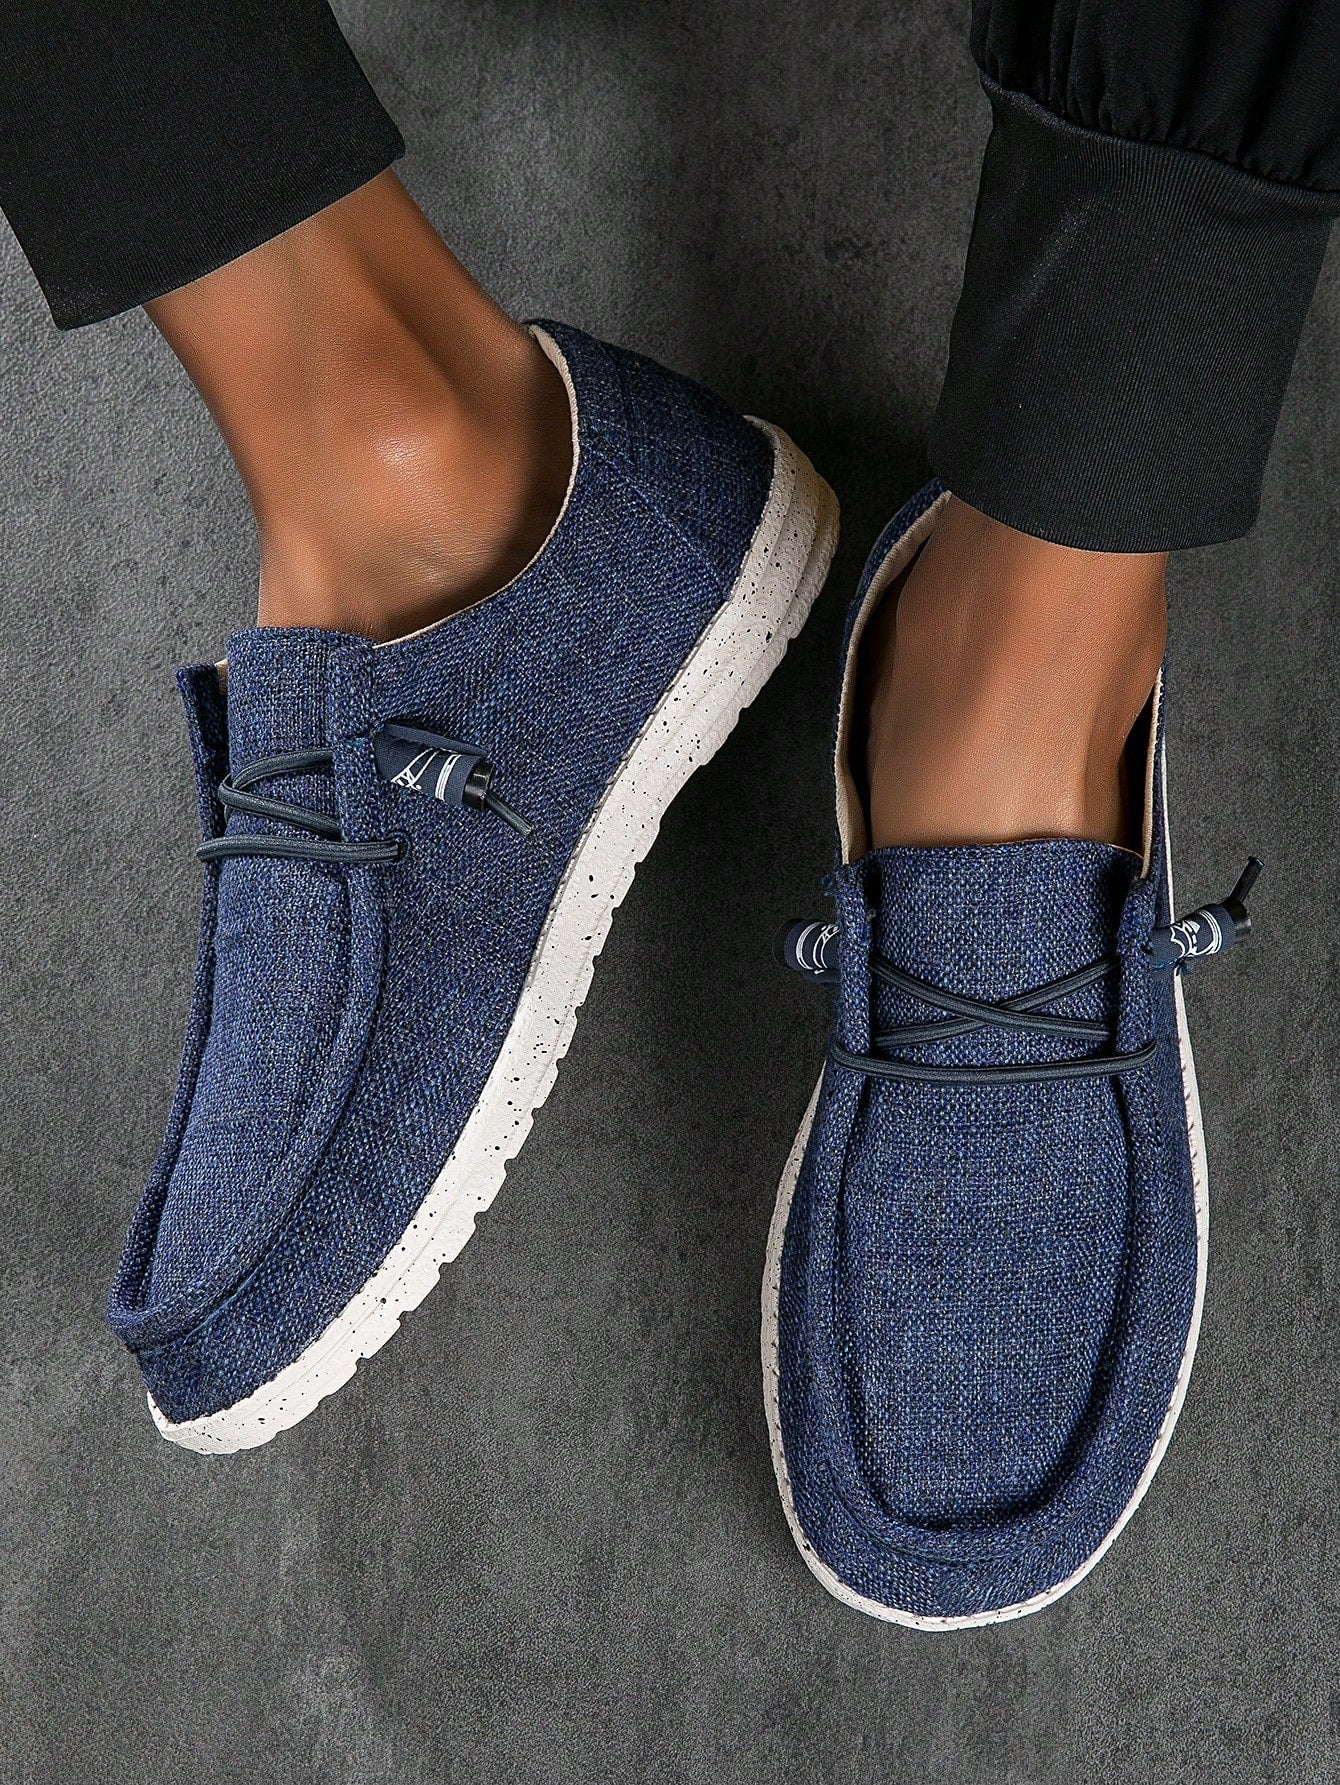 Fashion Blue Loafers For Men, Lace Up Design Boat Shoes